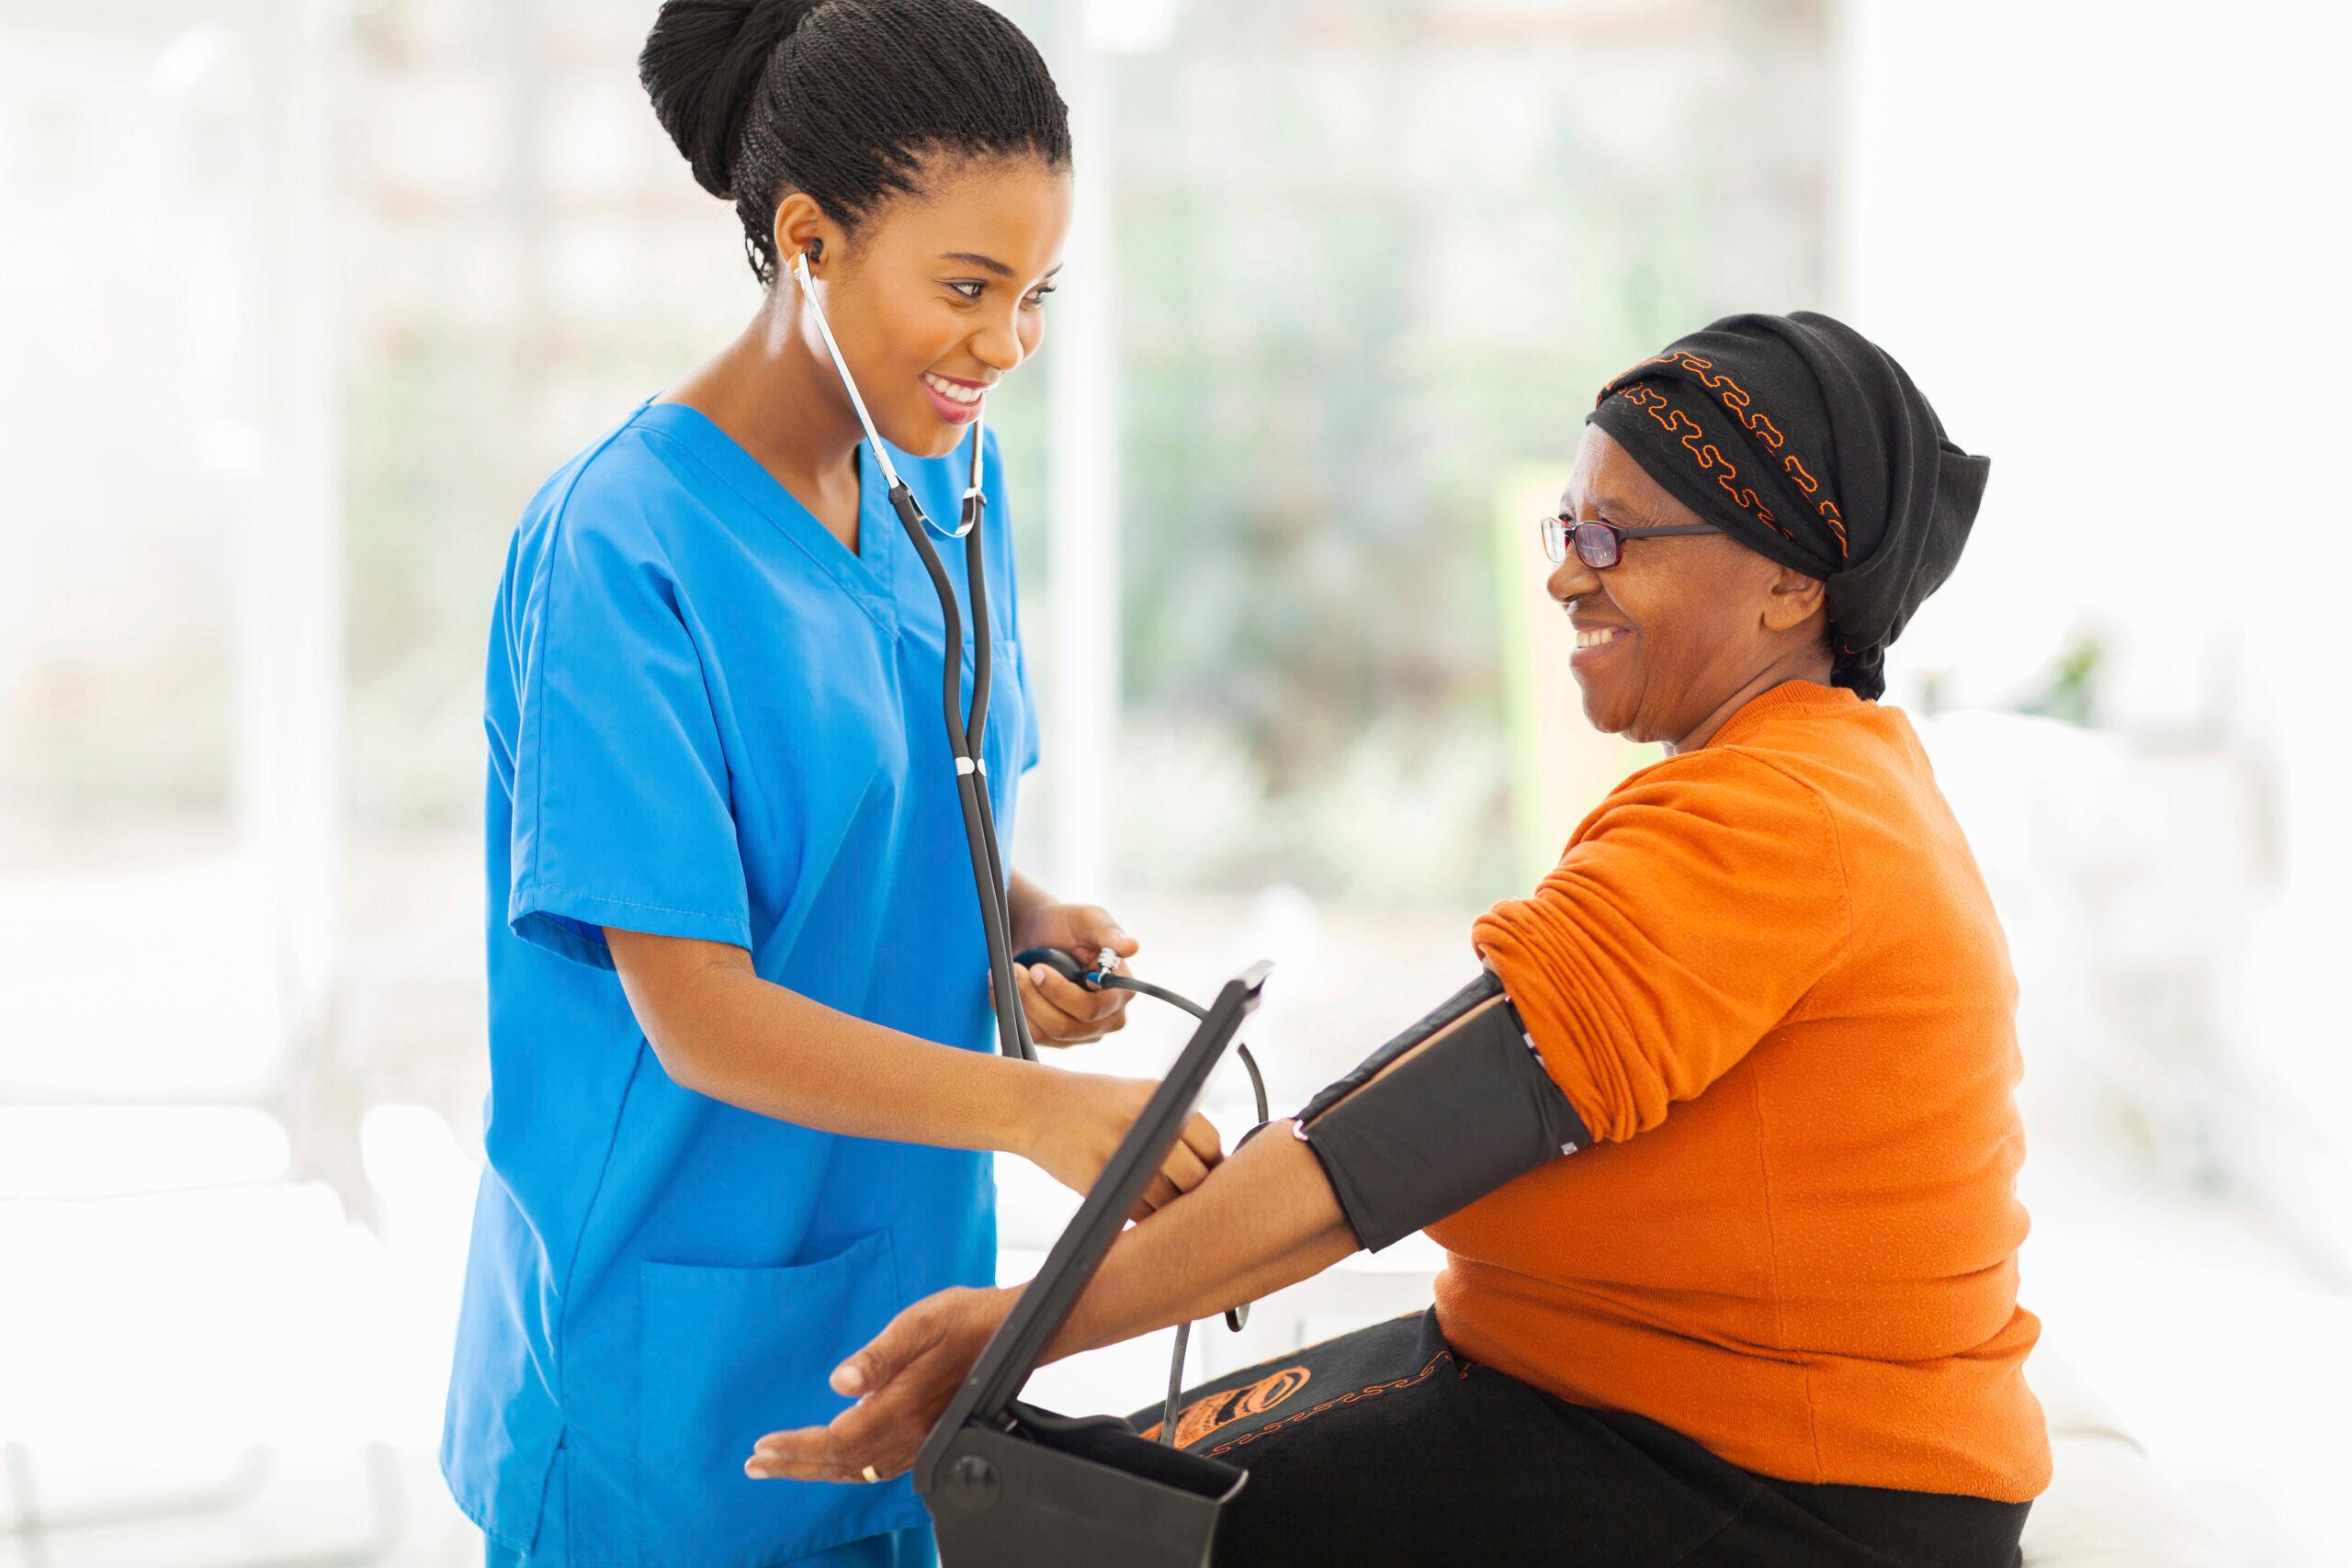 A provider measures the blood pressure of a female patient